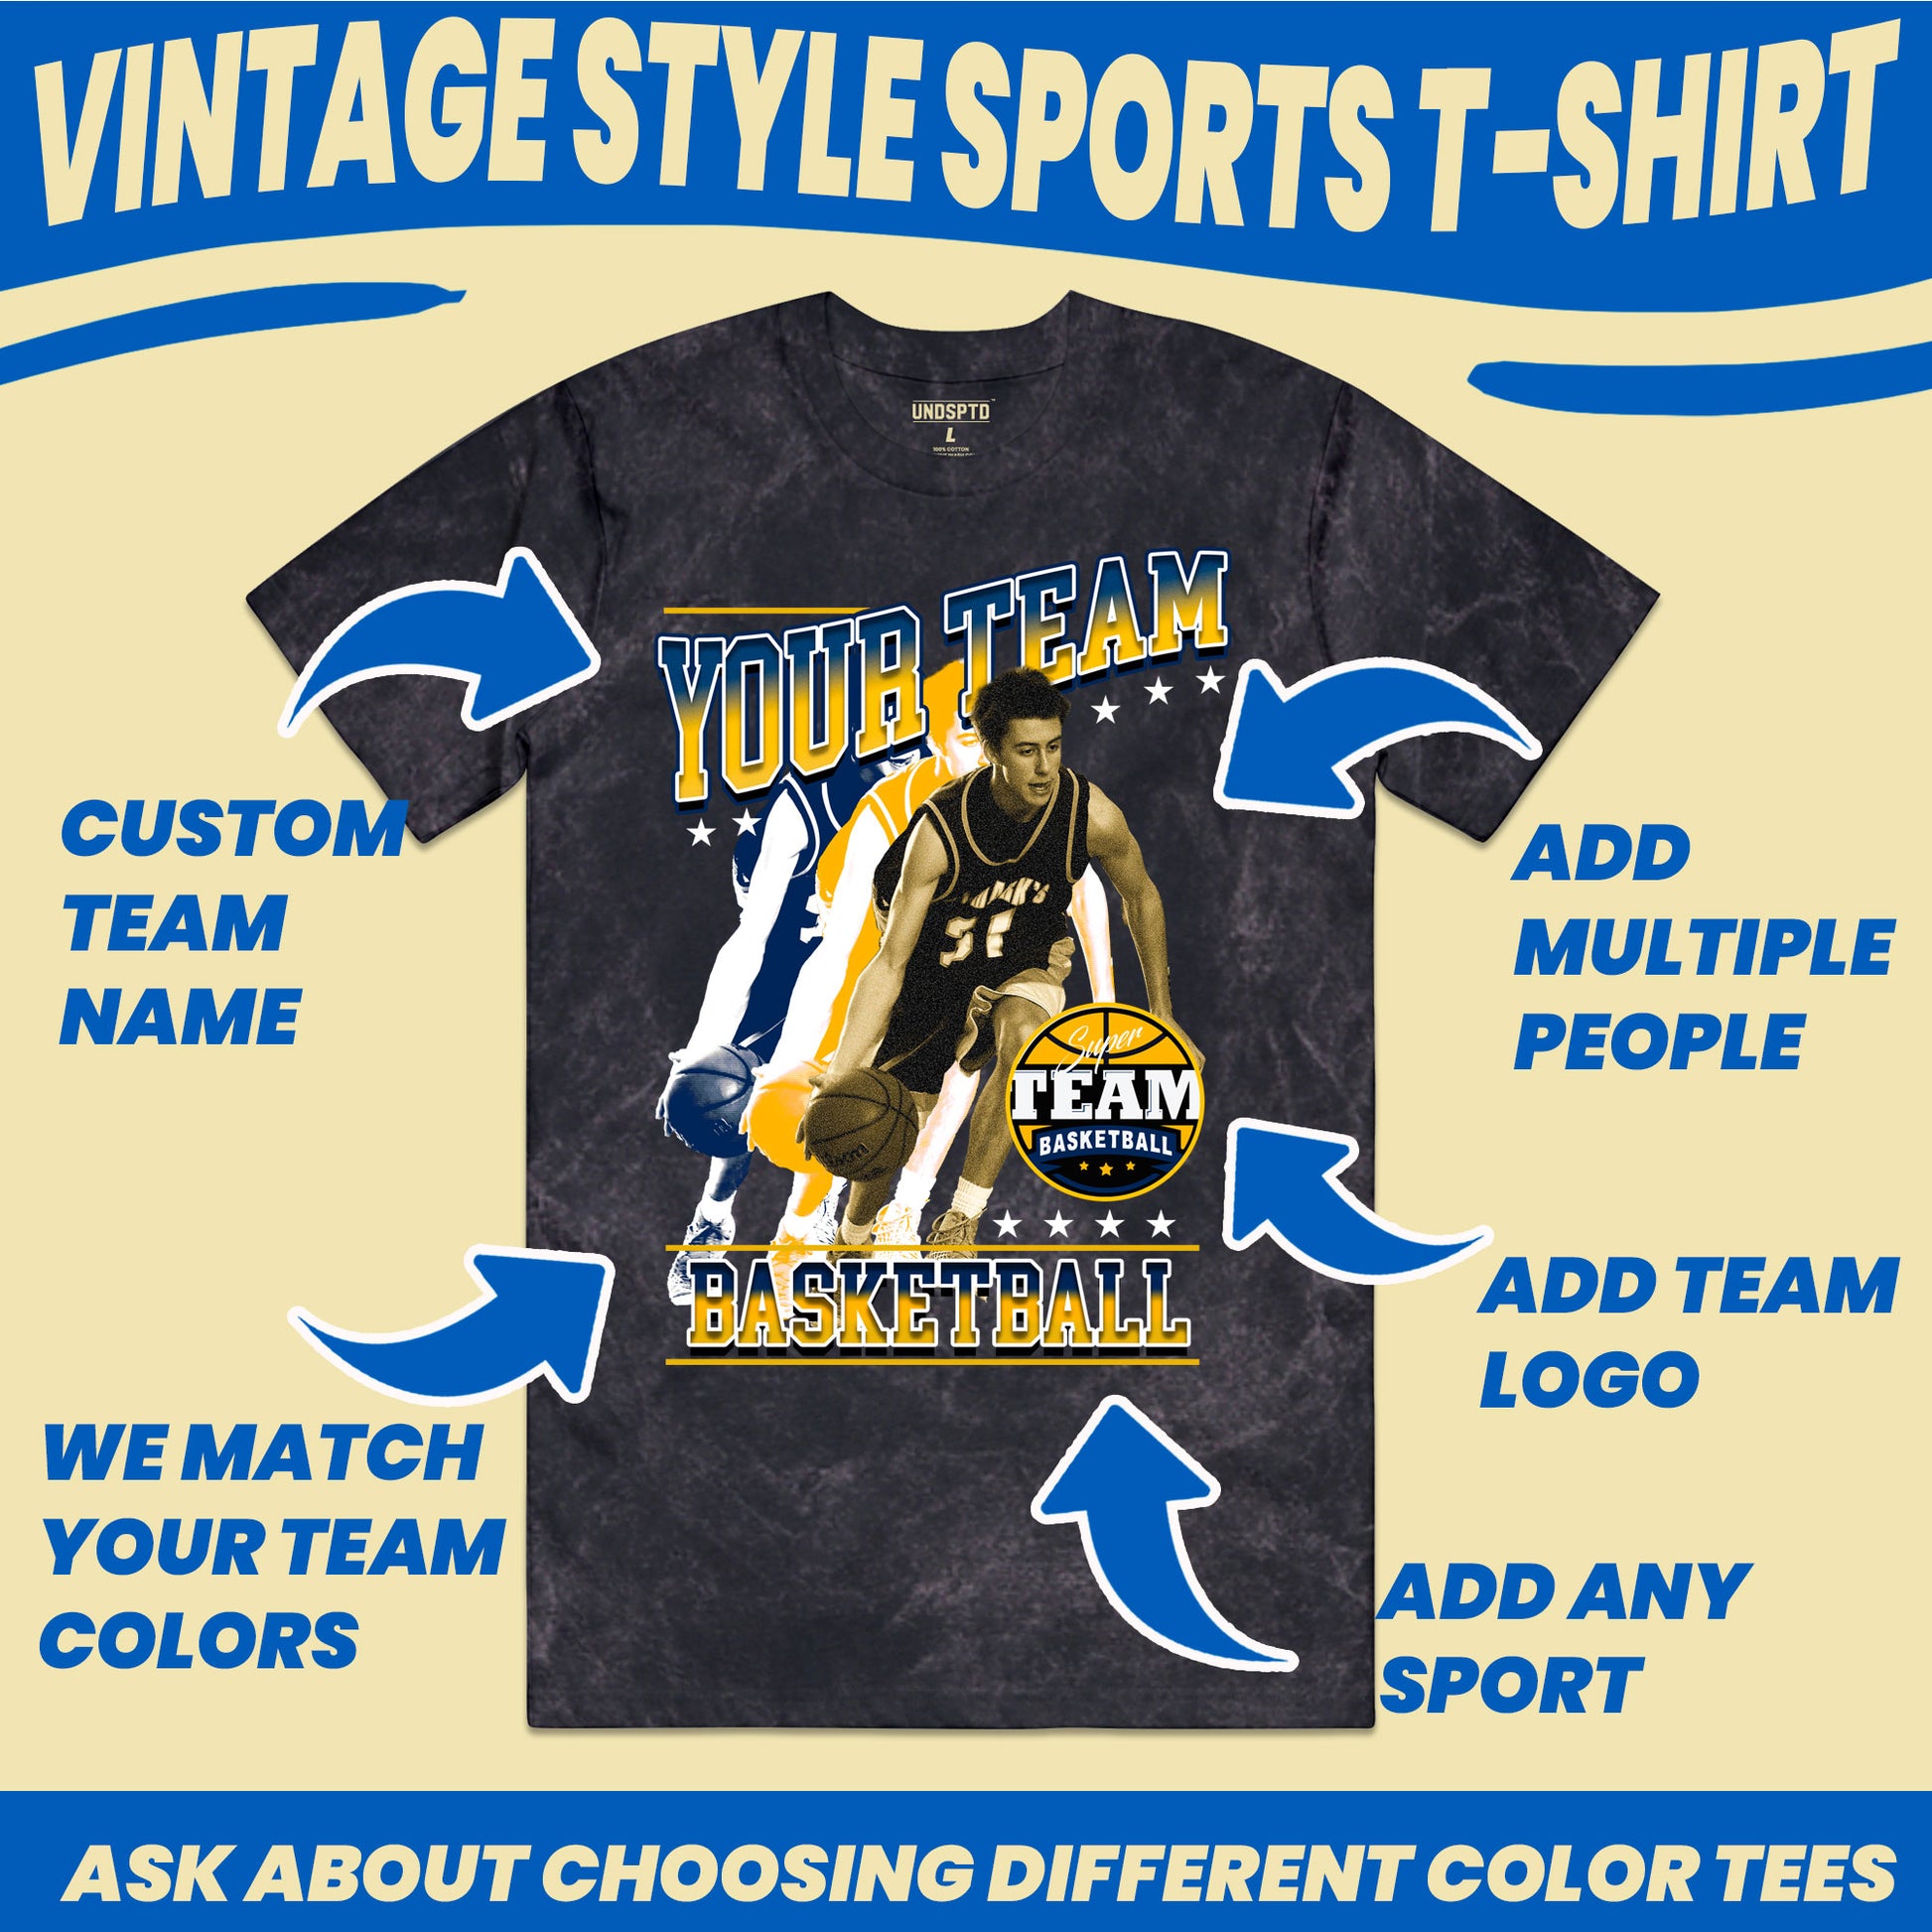 personalized vintage bootleg sports t-shirt customization options such as team name, team logo, player photos and sport